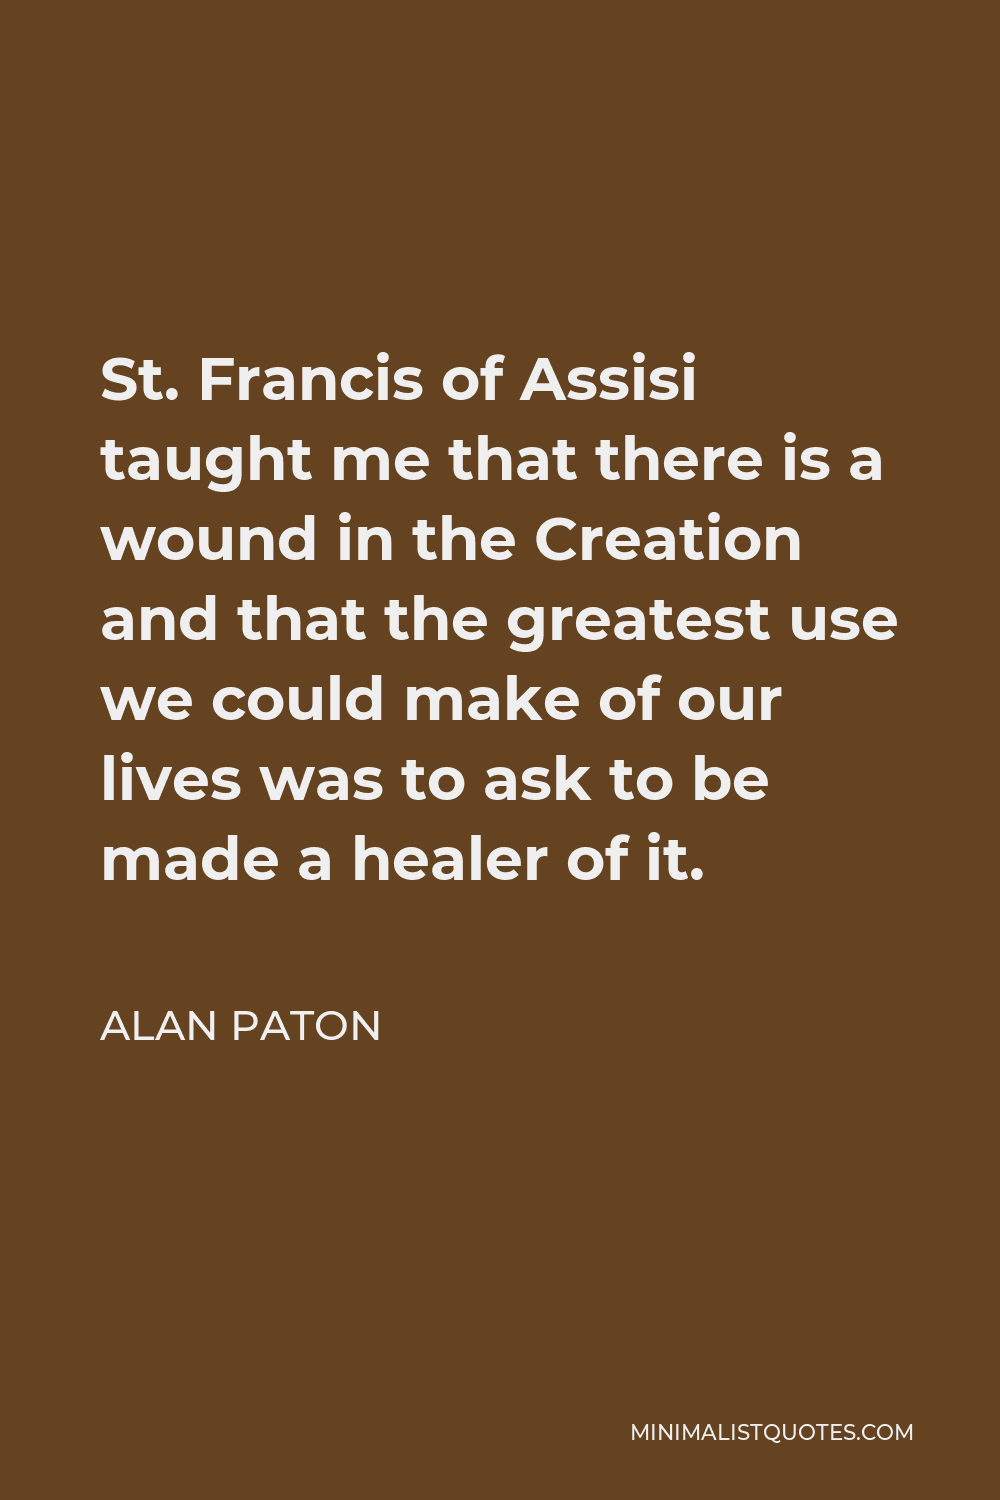 Alan Paton Quote - St. Francis of Assisi taught me that there is a wound in the Creation and that the greatest use we could make of our lives was to ask to be made a healer of it.